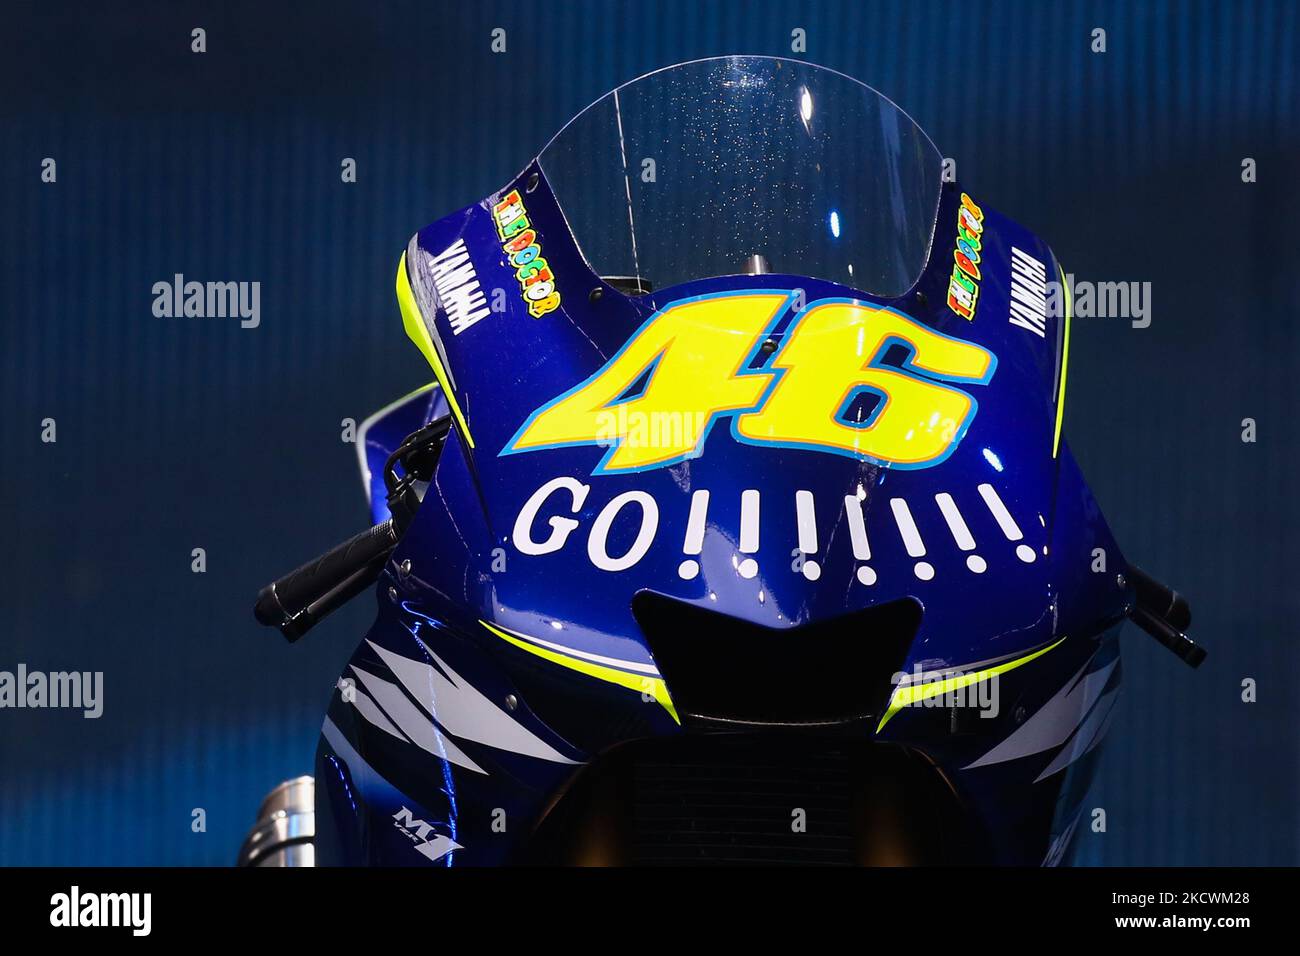 Valentino Rossi's Yamaha M1 MotoGP motorcycle is seen during the 'One More Lap' event, organized to mark the end of Valentino Rossi's MotoGP career, as a part of the EICMA motorcycle show in Milan, Italy on November 25, 2021. (Photo by Jakub Porzycki/NurPhoto) Stock Photo